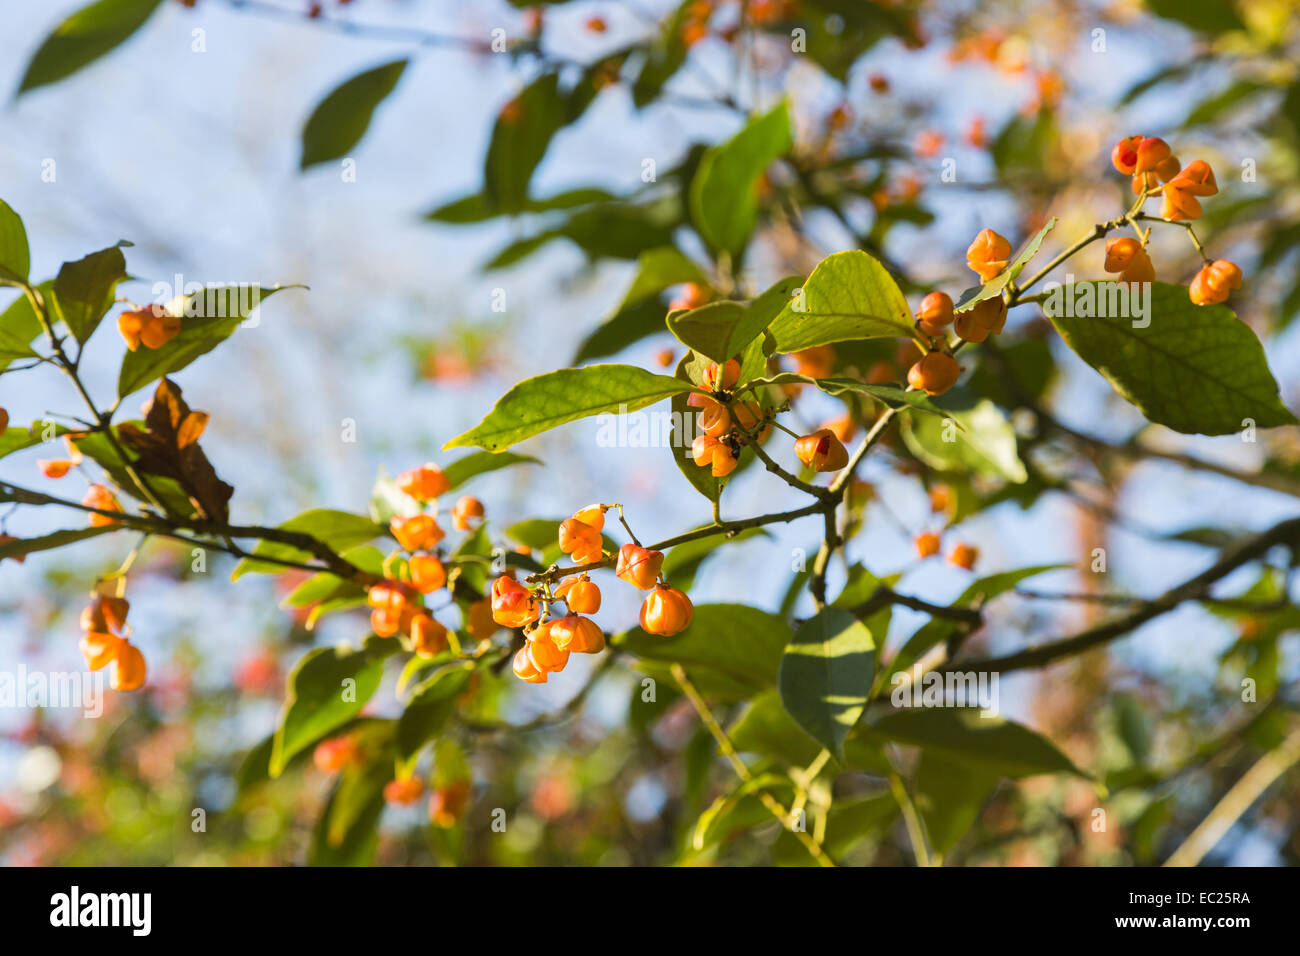 Close up view of colourful orange to yellow fruits of Euonymus myrianthus, a rare type of spindle tree native to western China, fruiting in winter Stock Photo